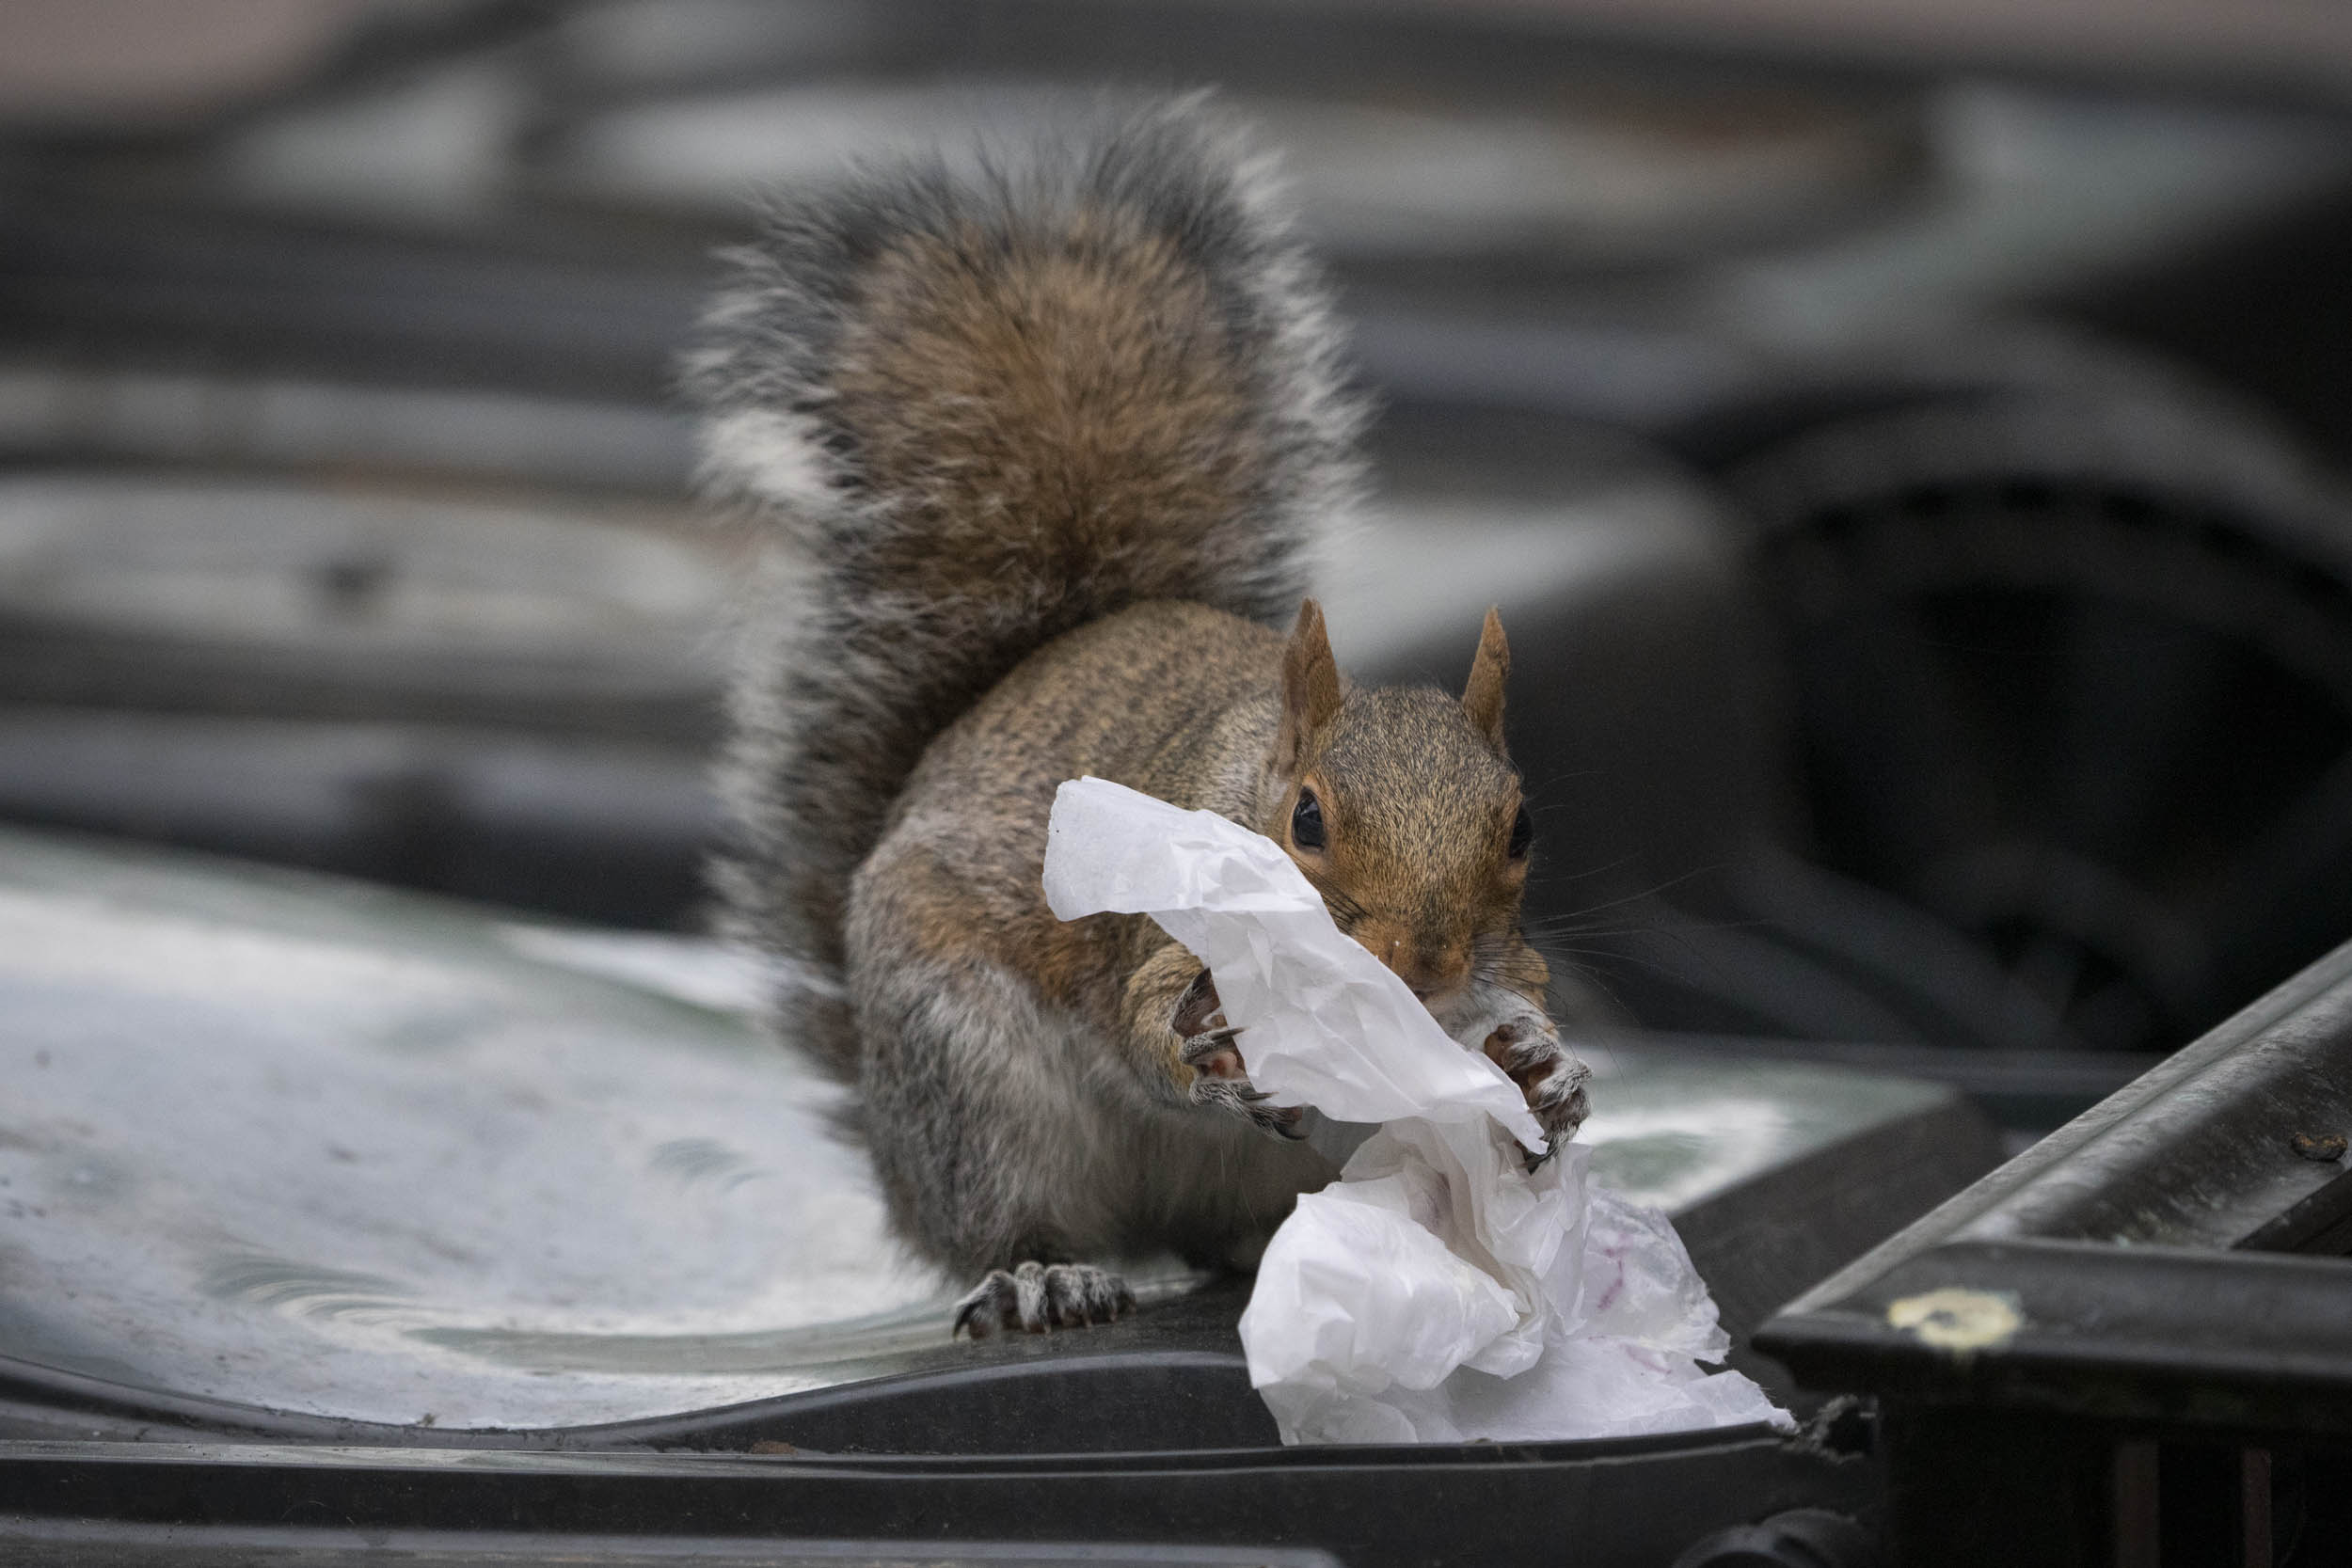 Squirrel Sitting on a trashcan holding a piece of paper from the trashcan